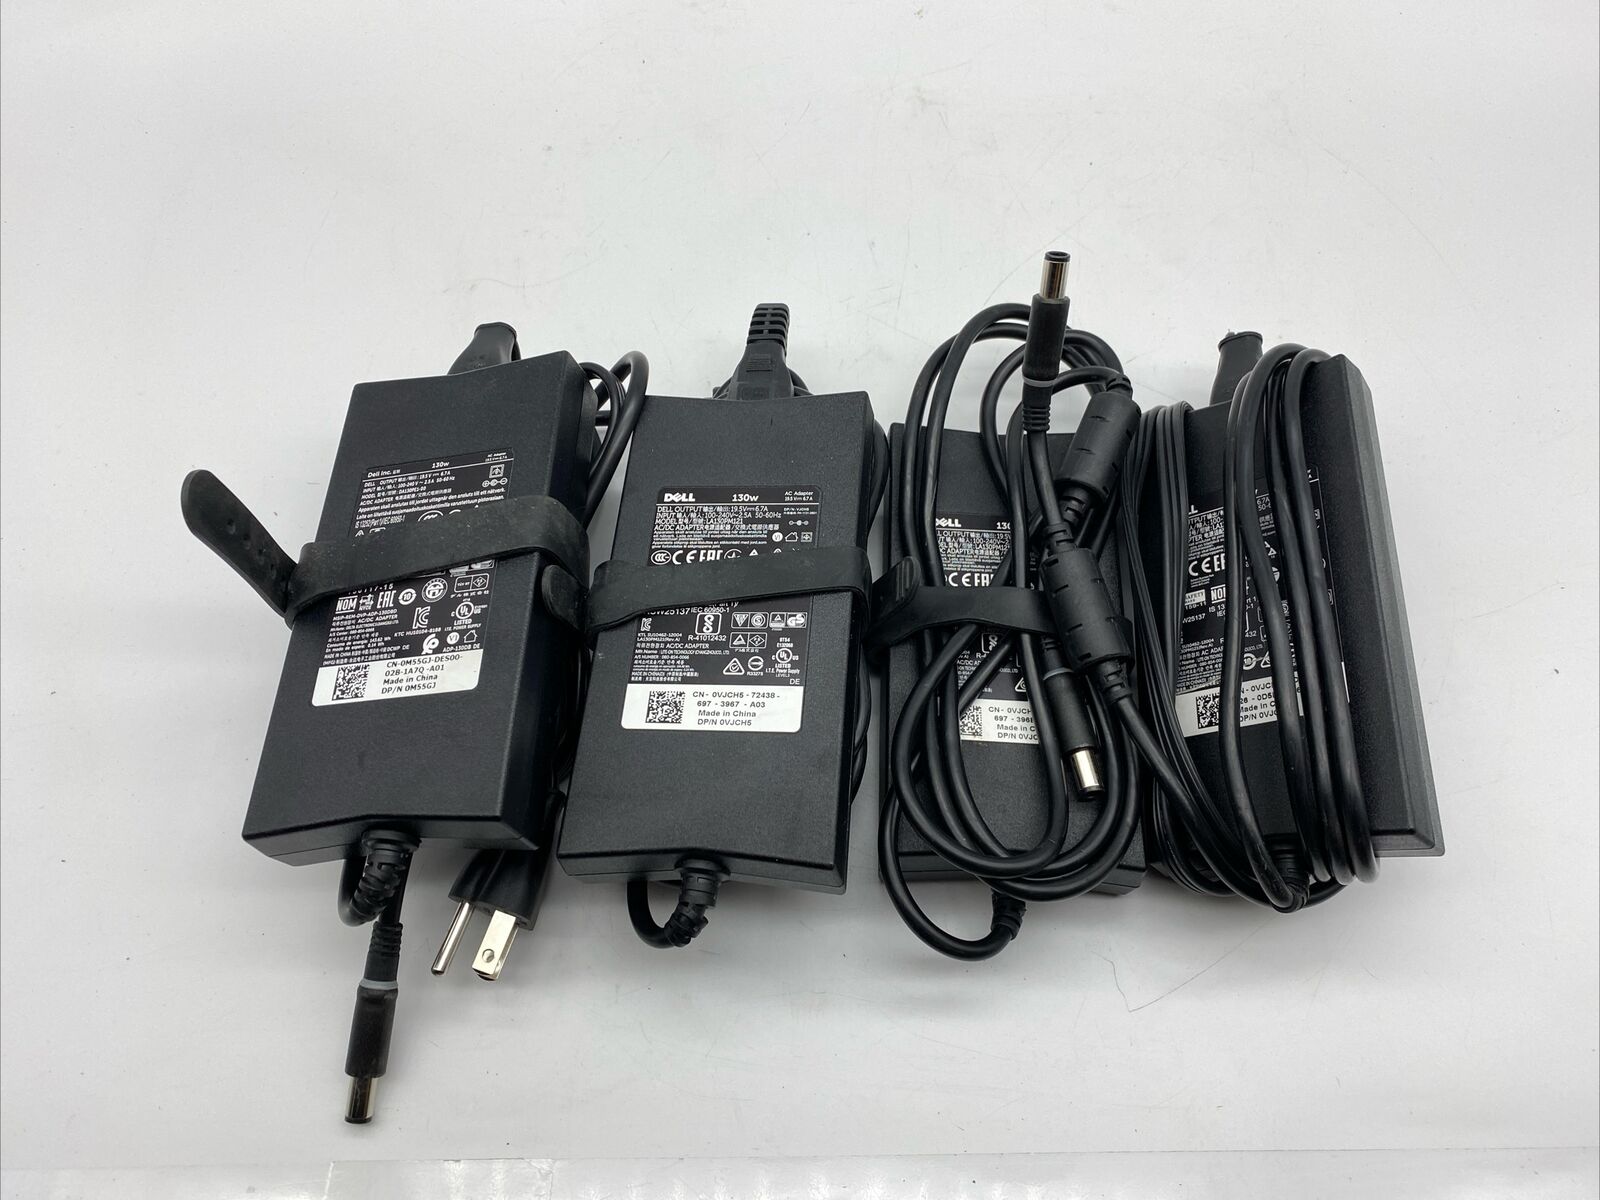 Lot of 4 Dell 130W AC Laptop Adapter Power Charger 19.5V LA130PM121